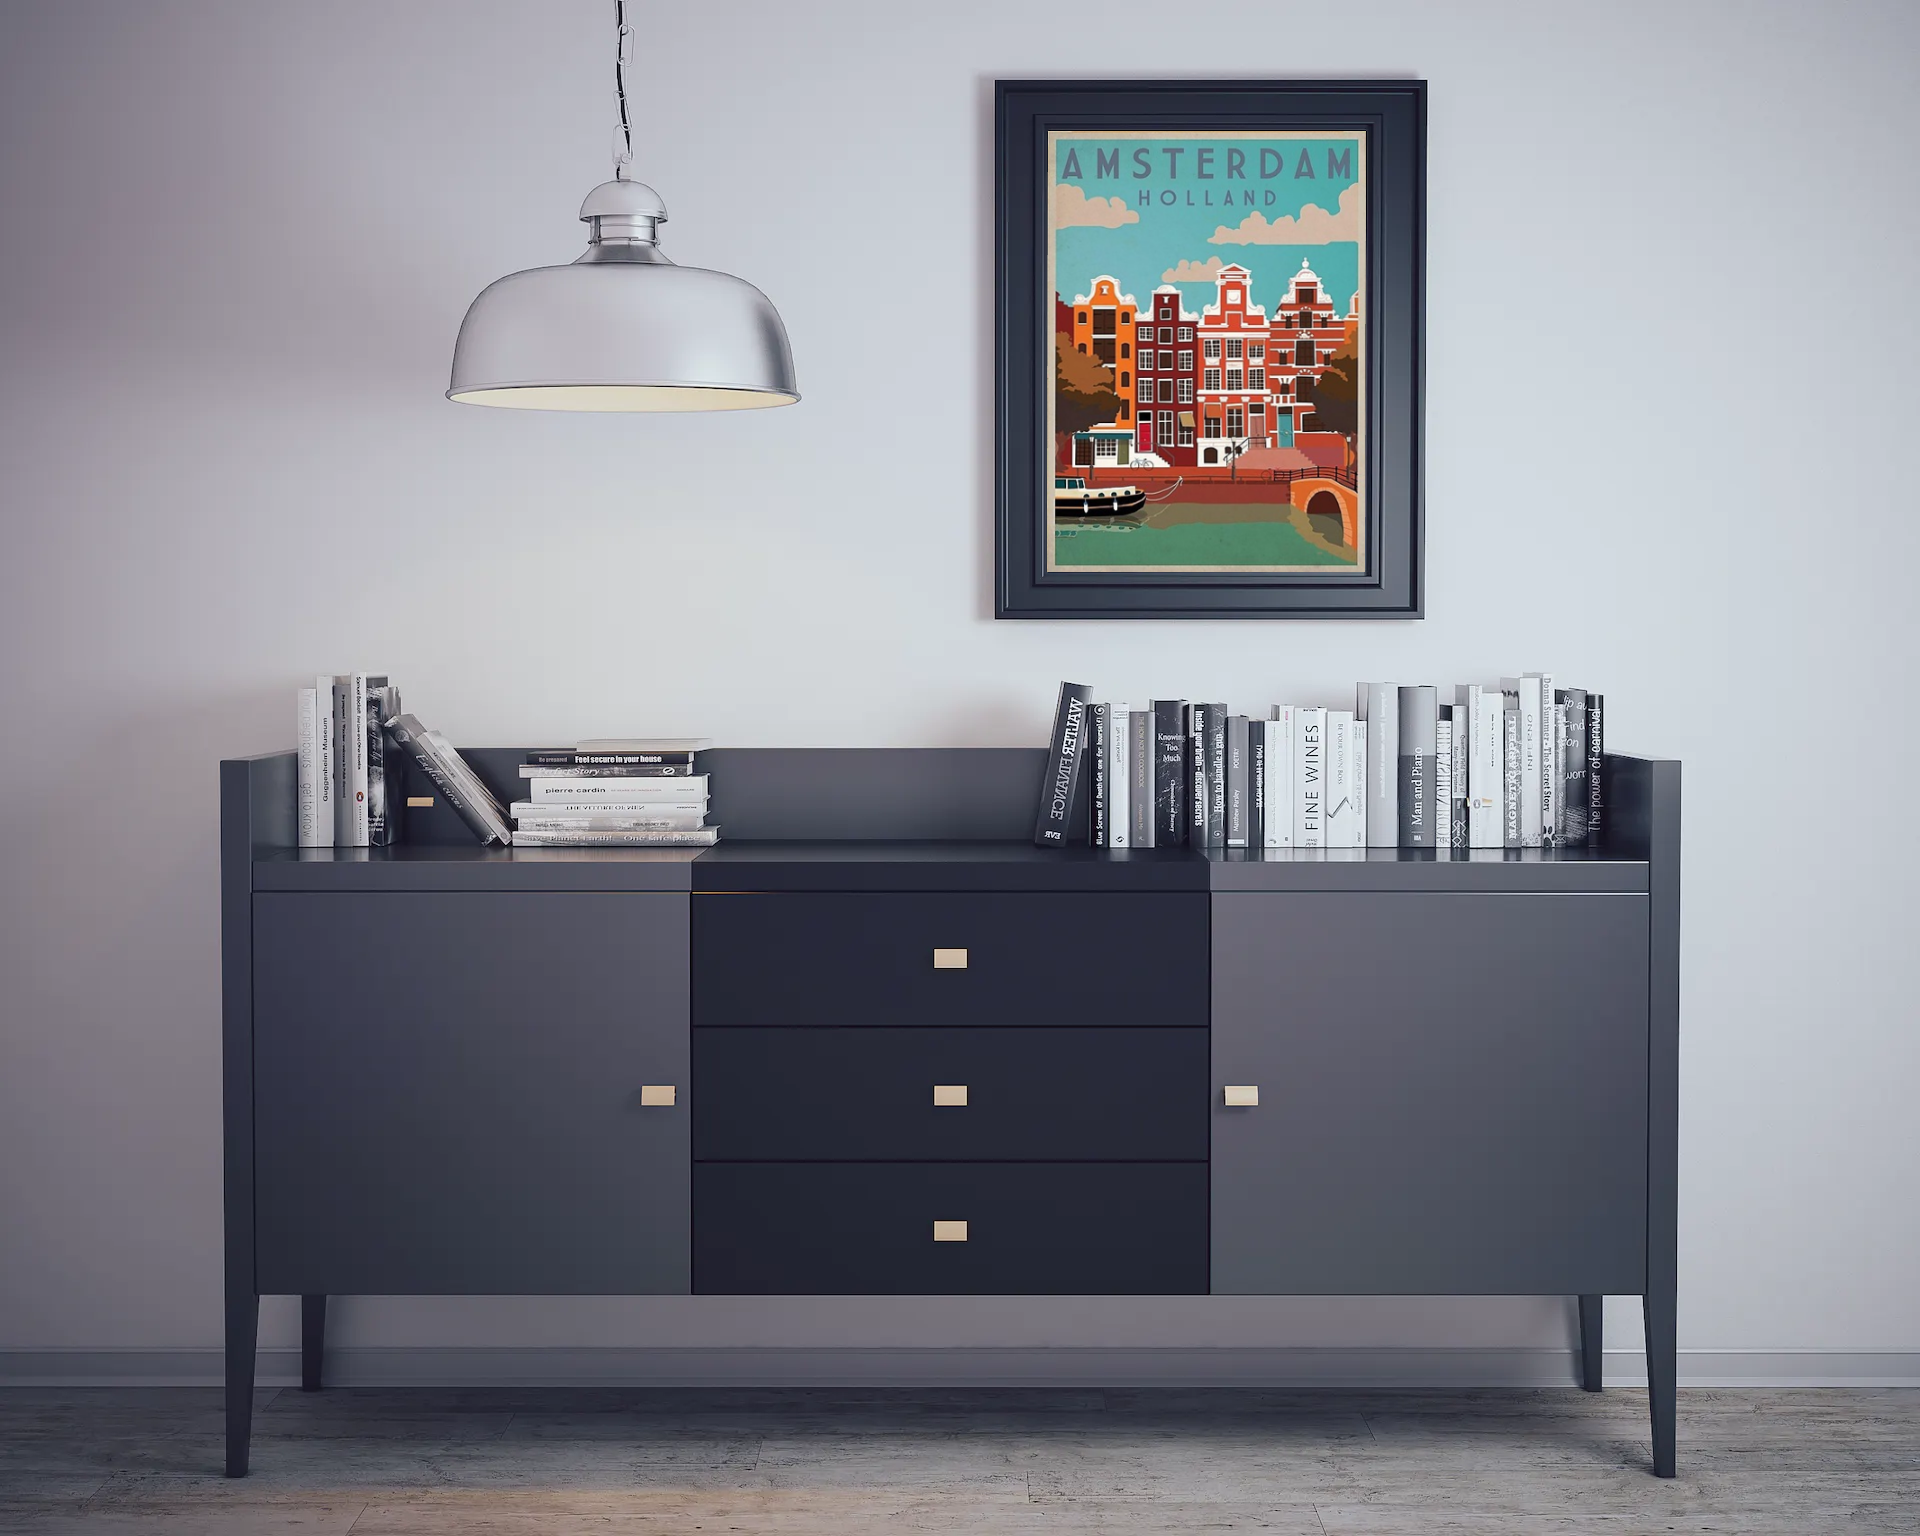 Vintage Amsterdam Canals Poster